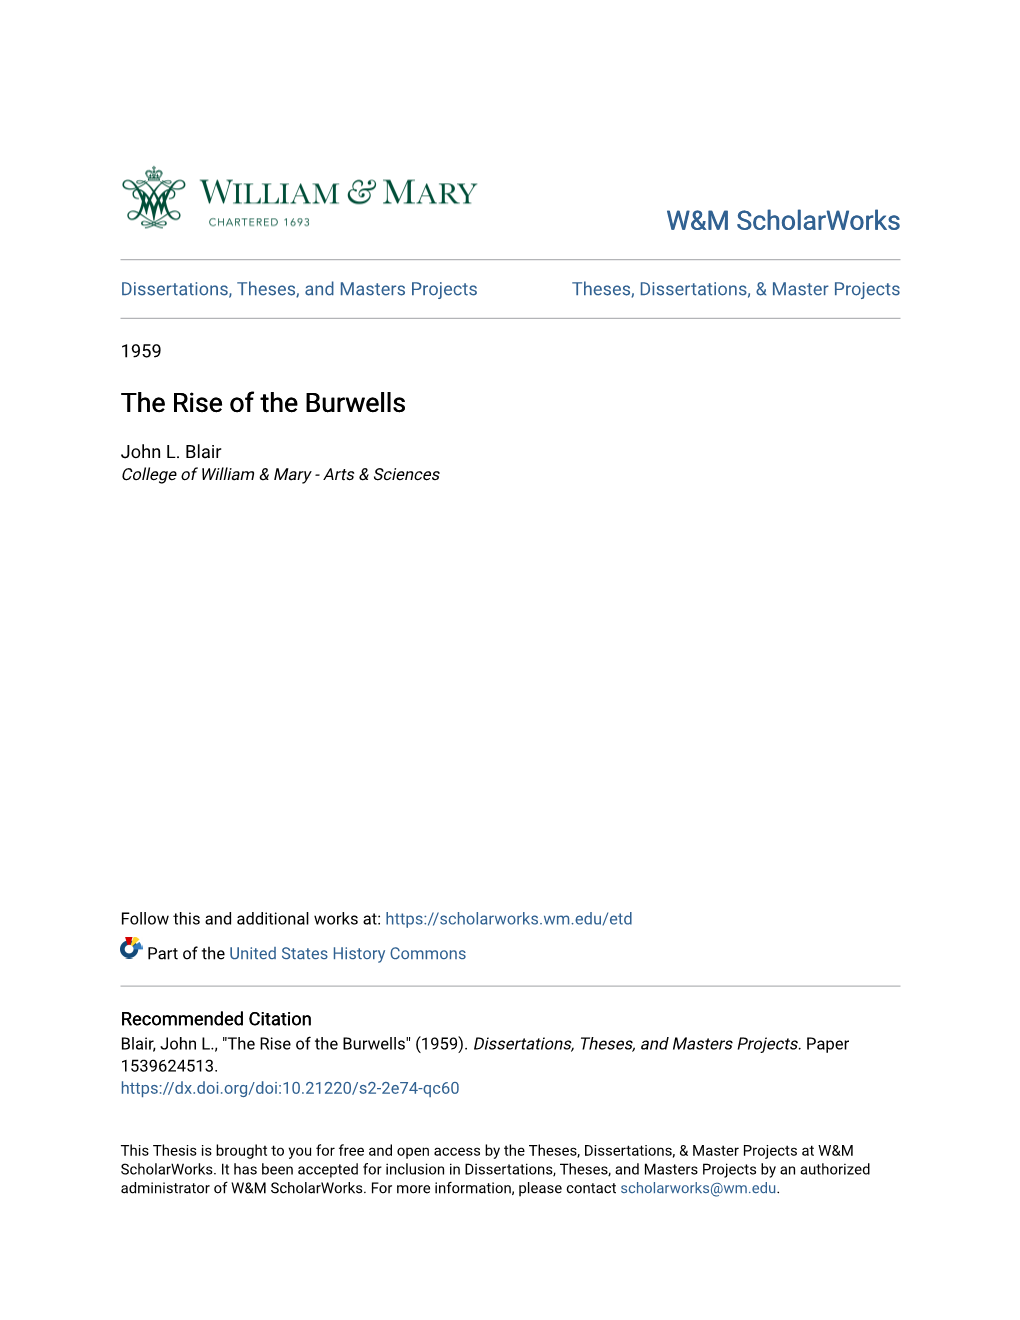 The Rise of the Burwells